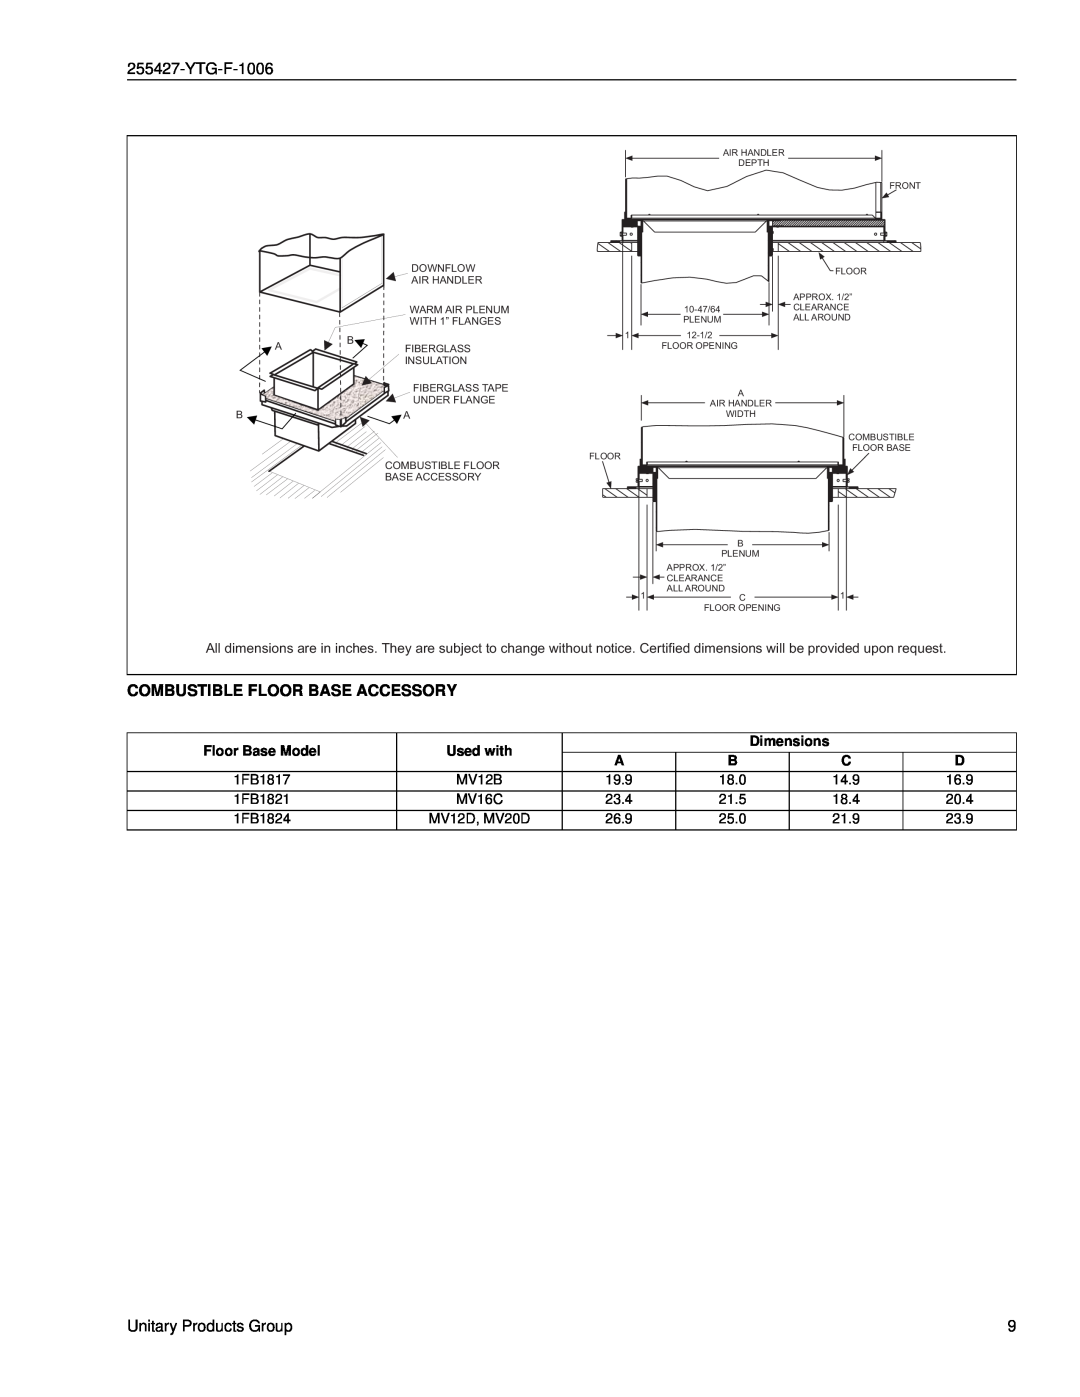 York MV specifications YTG-F-1006, Combustible Floor Base Accessory, Unitary Products Group 